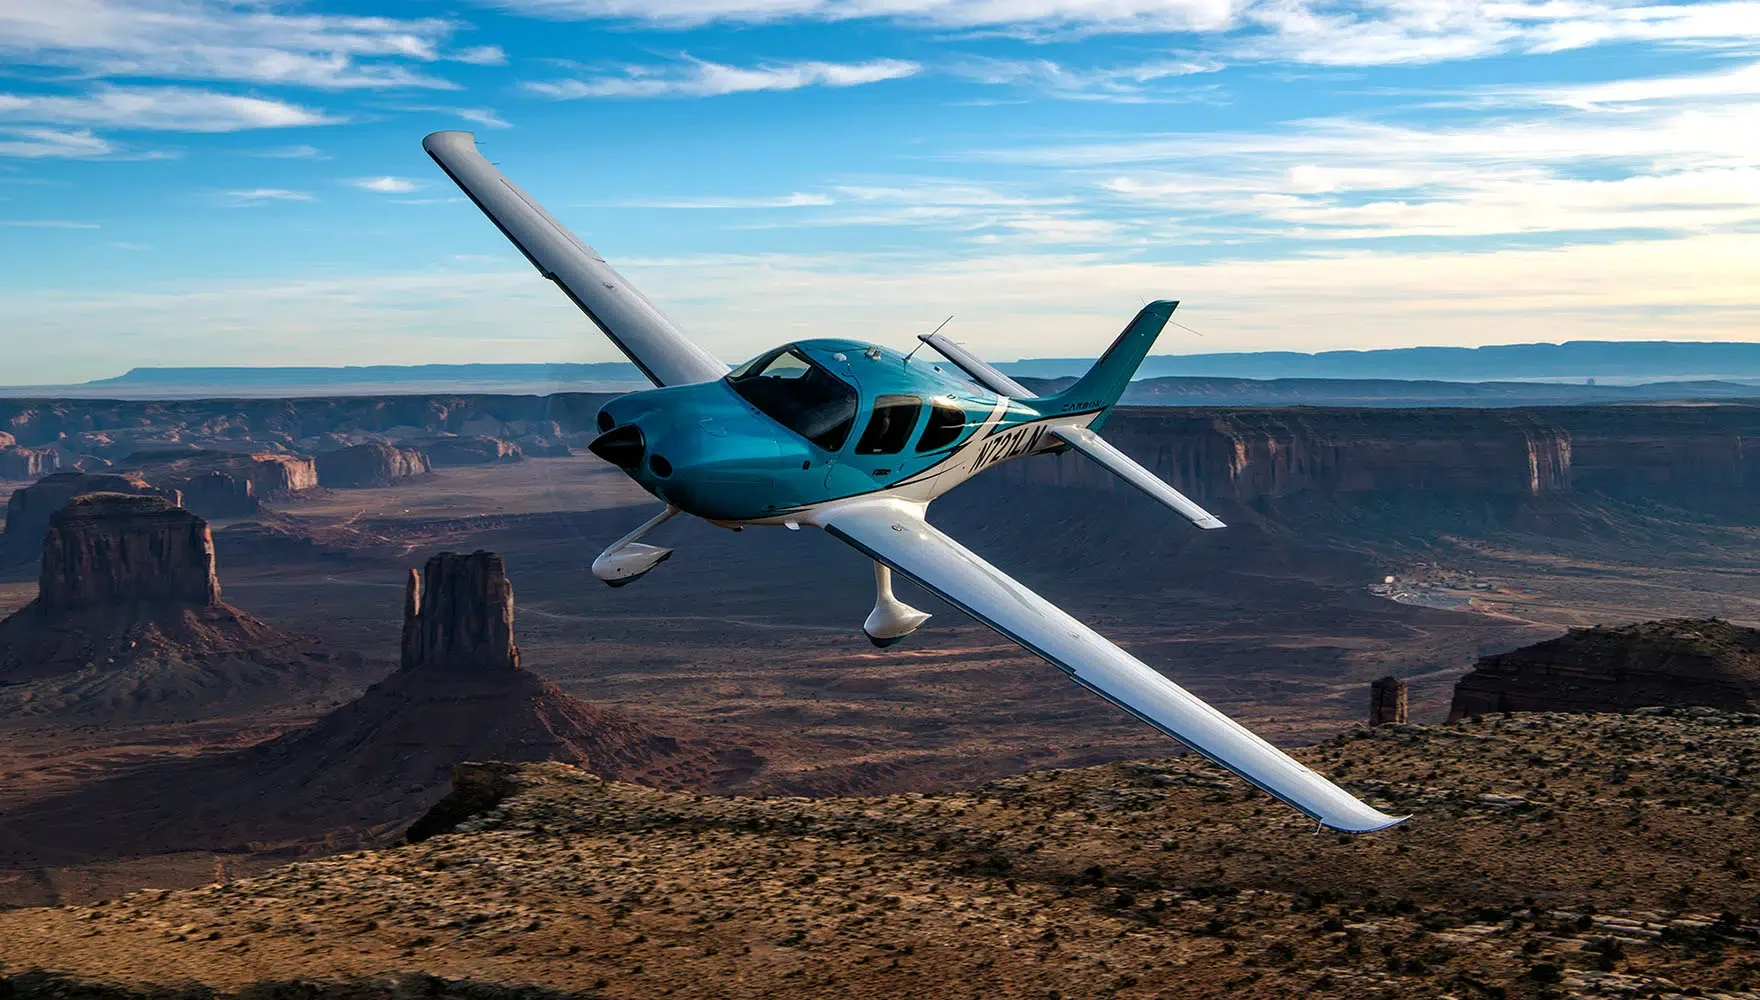 Cirrus Aircraft Continues Expansion with New Flight Training Facility and Innovation Centers in Arizona and Texas